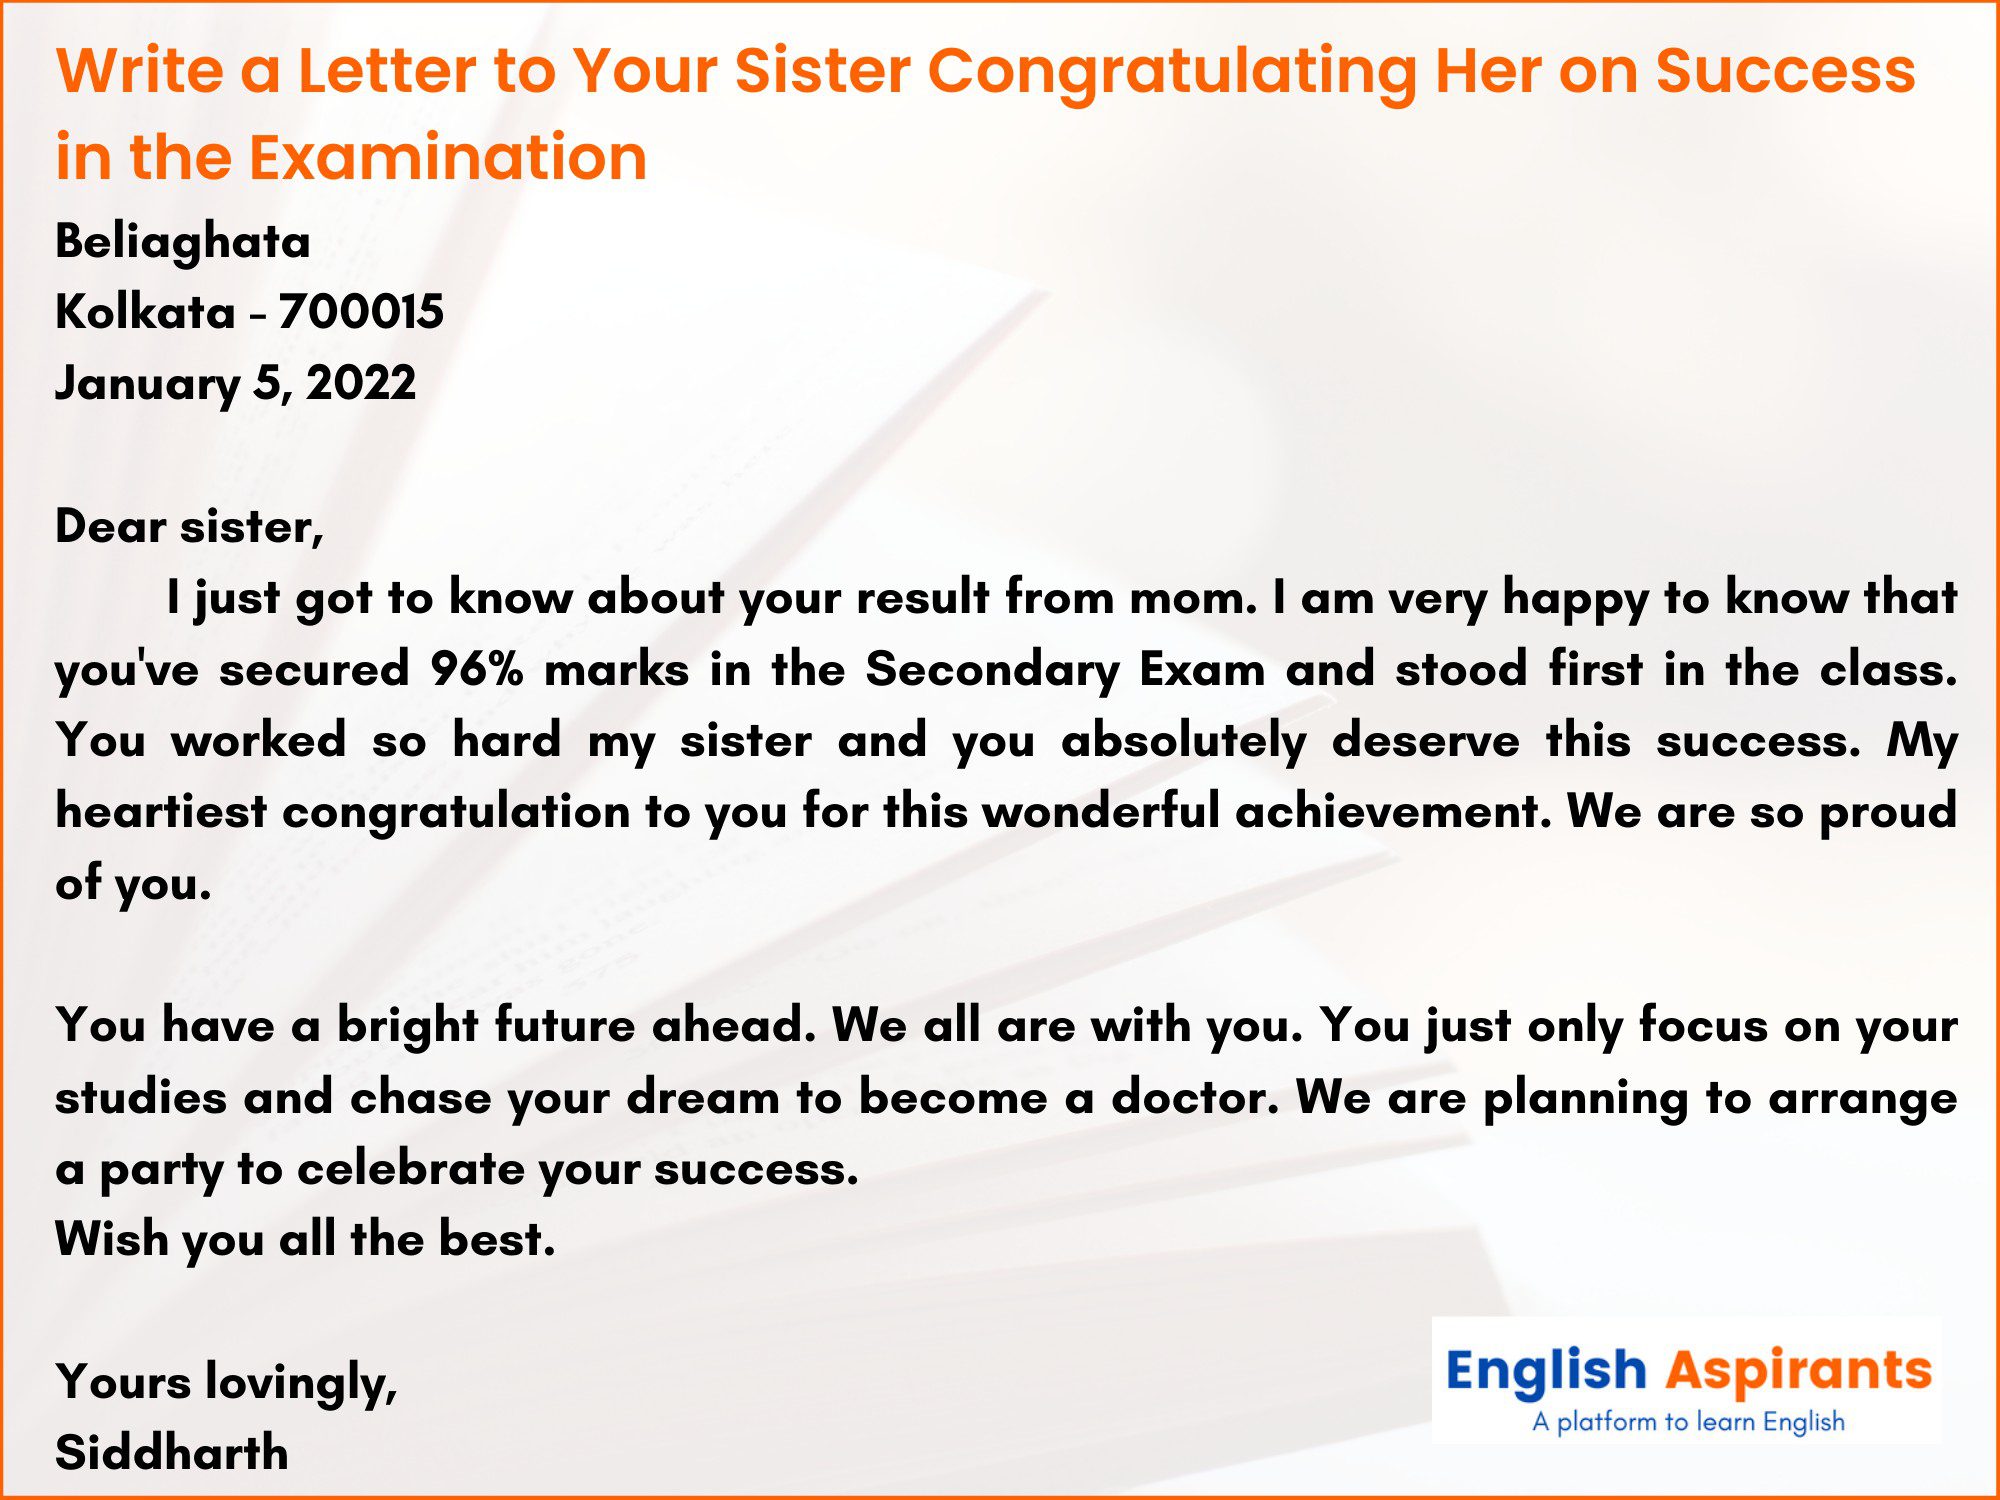 Letter to Your Sister Congratulating Her on Success in the Examination